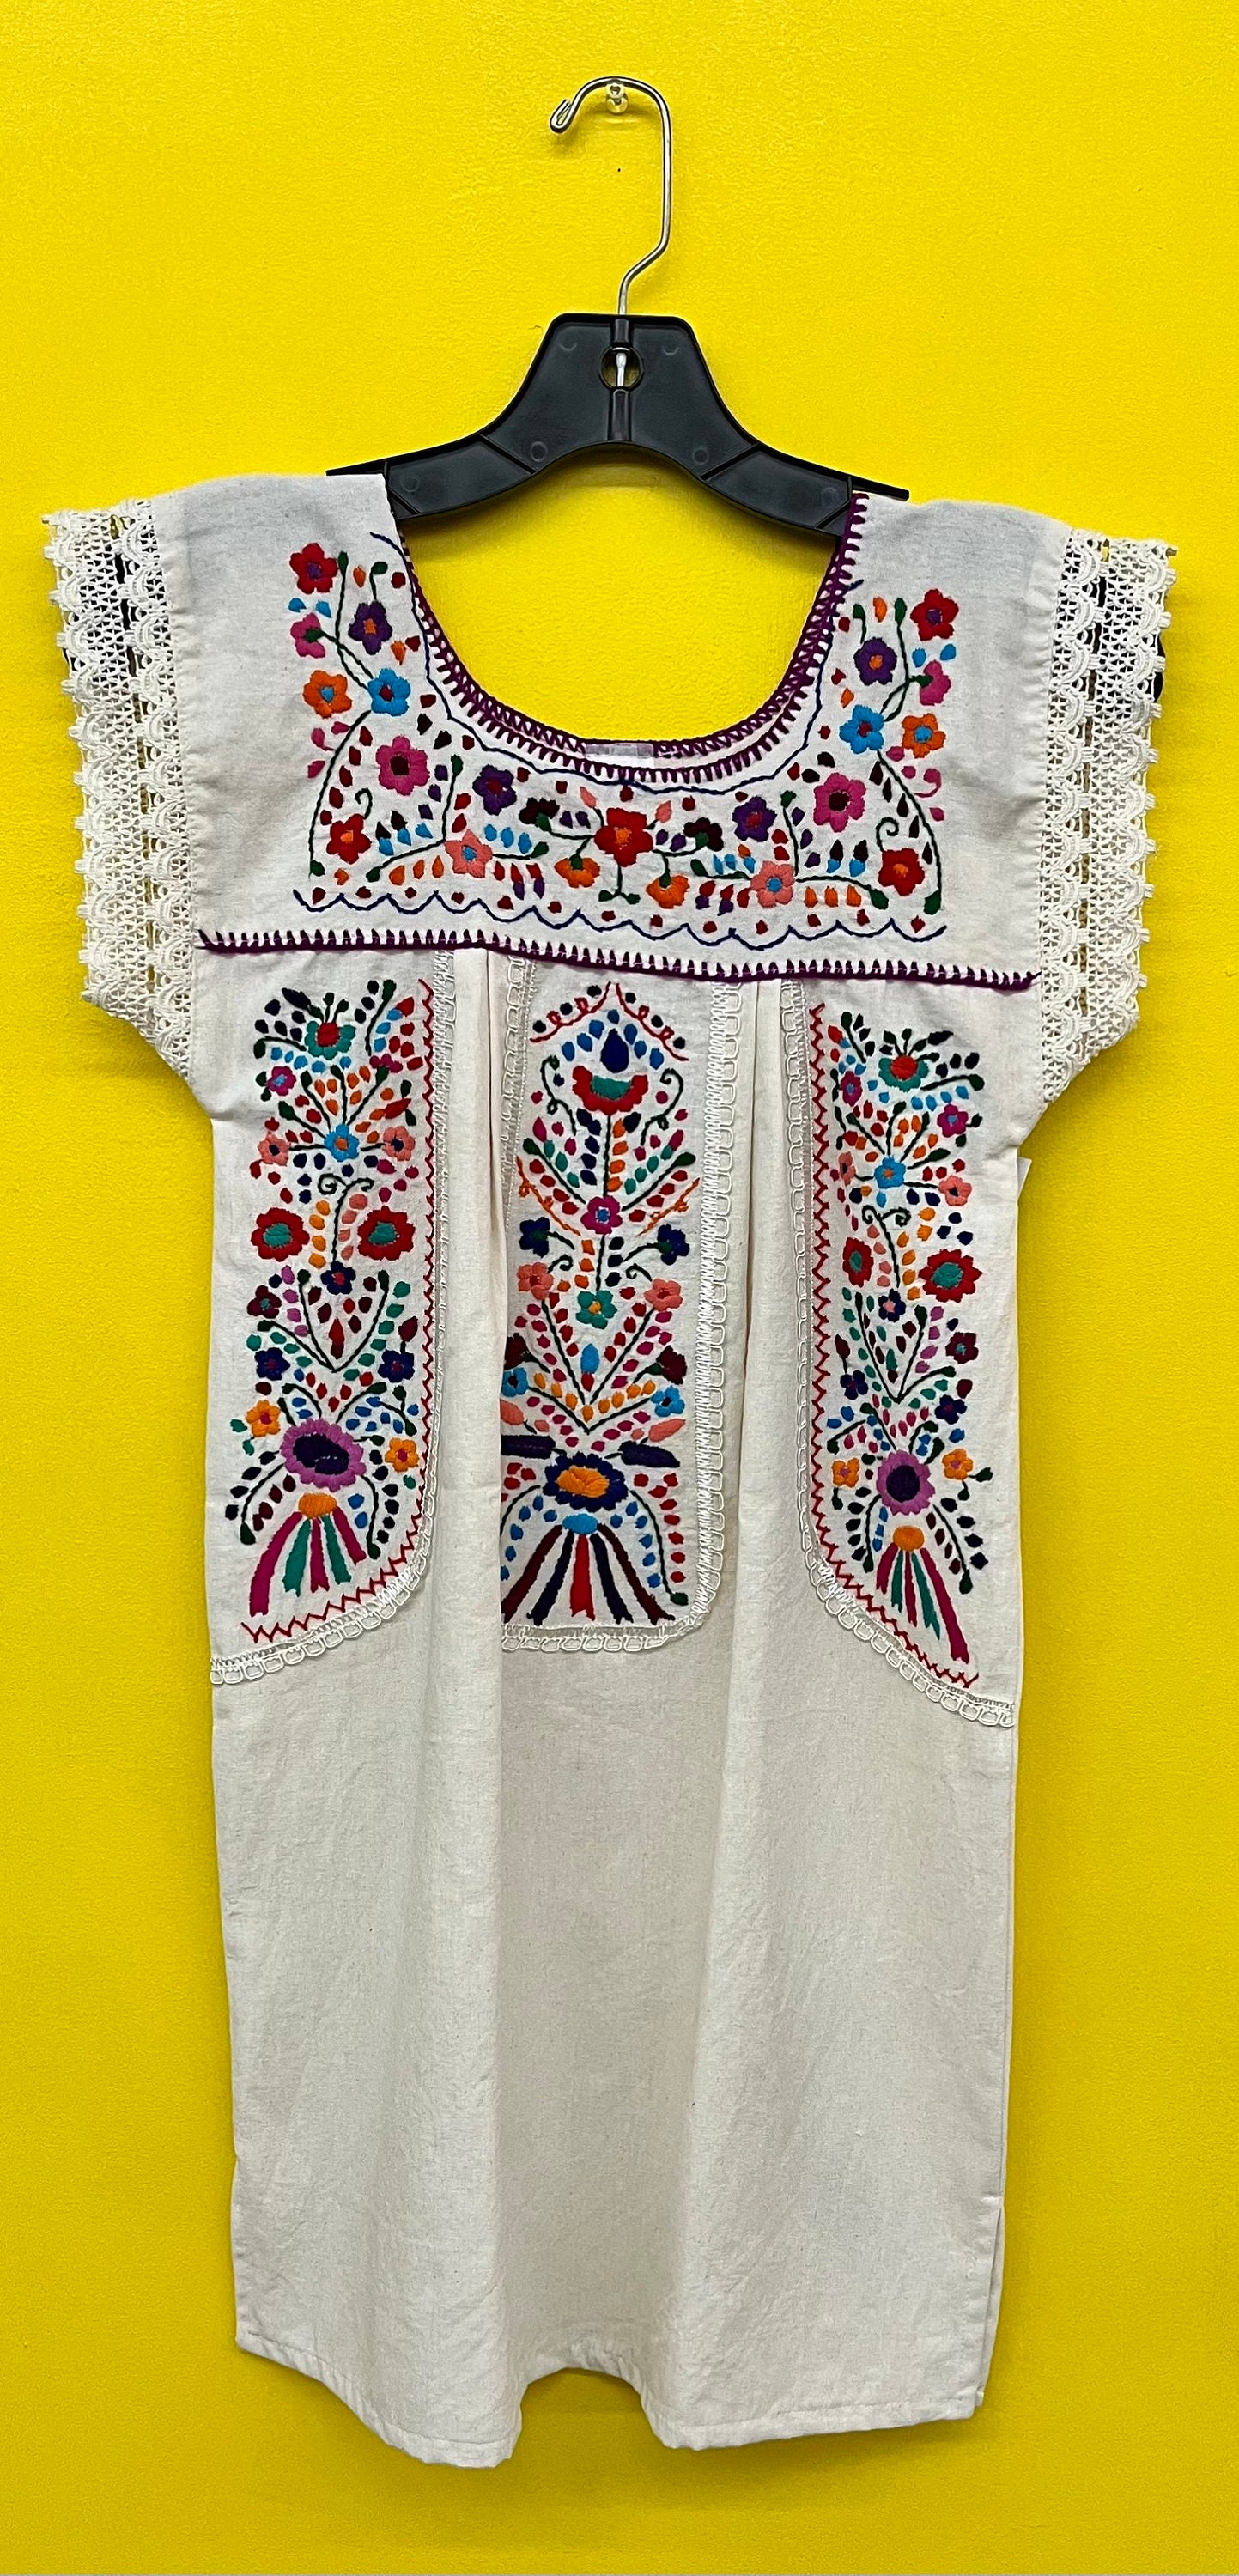 Girl's Mexican Lace Dress off White | Etsy